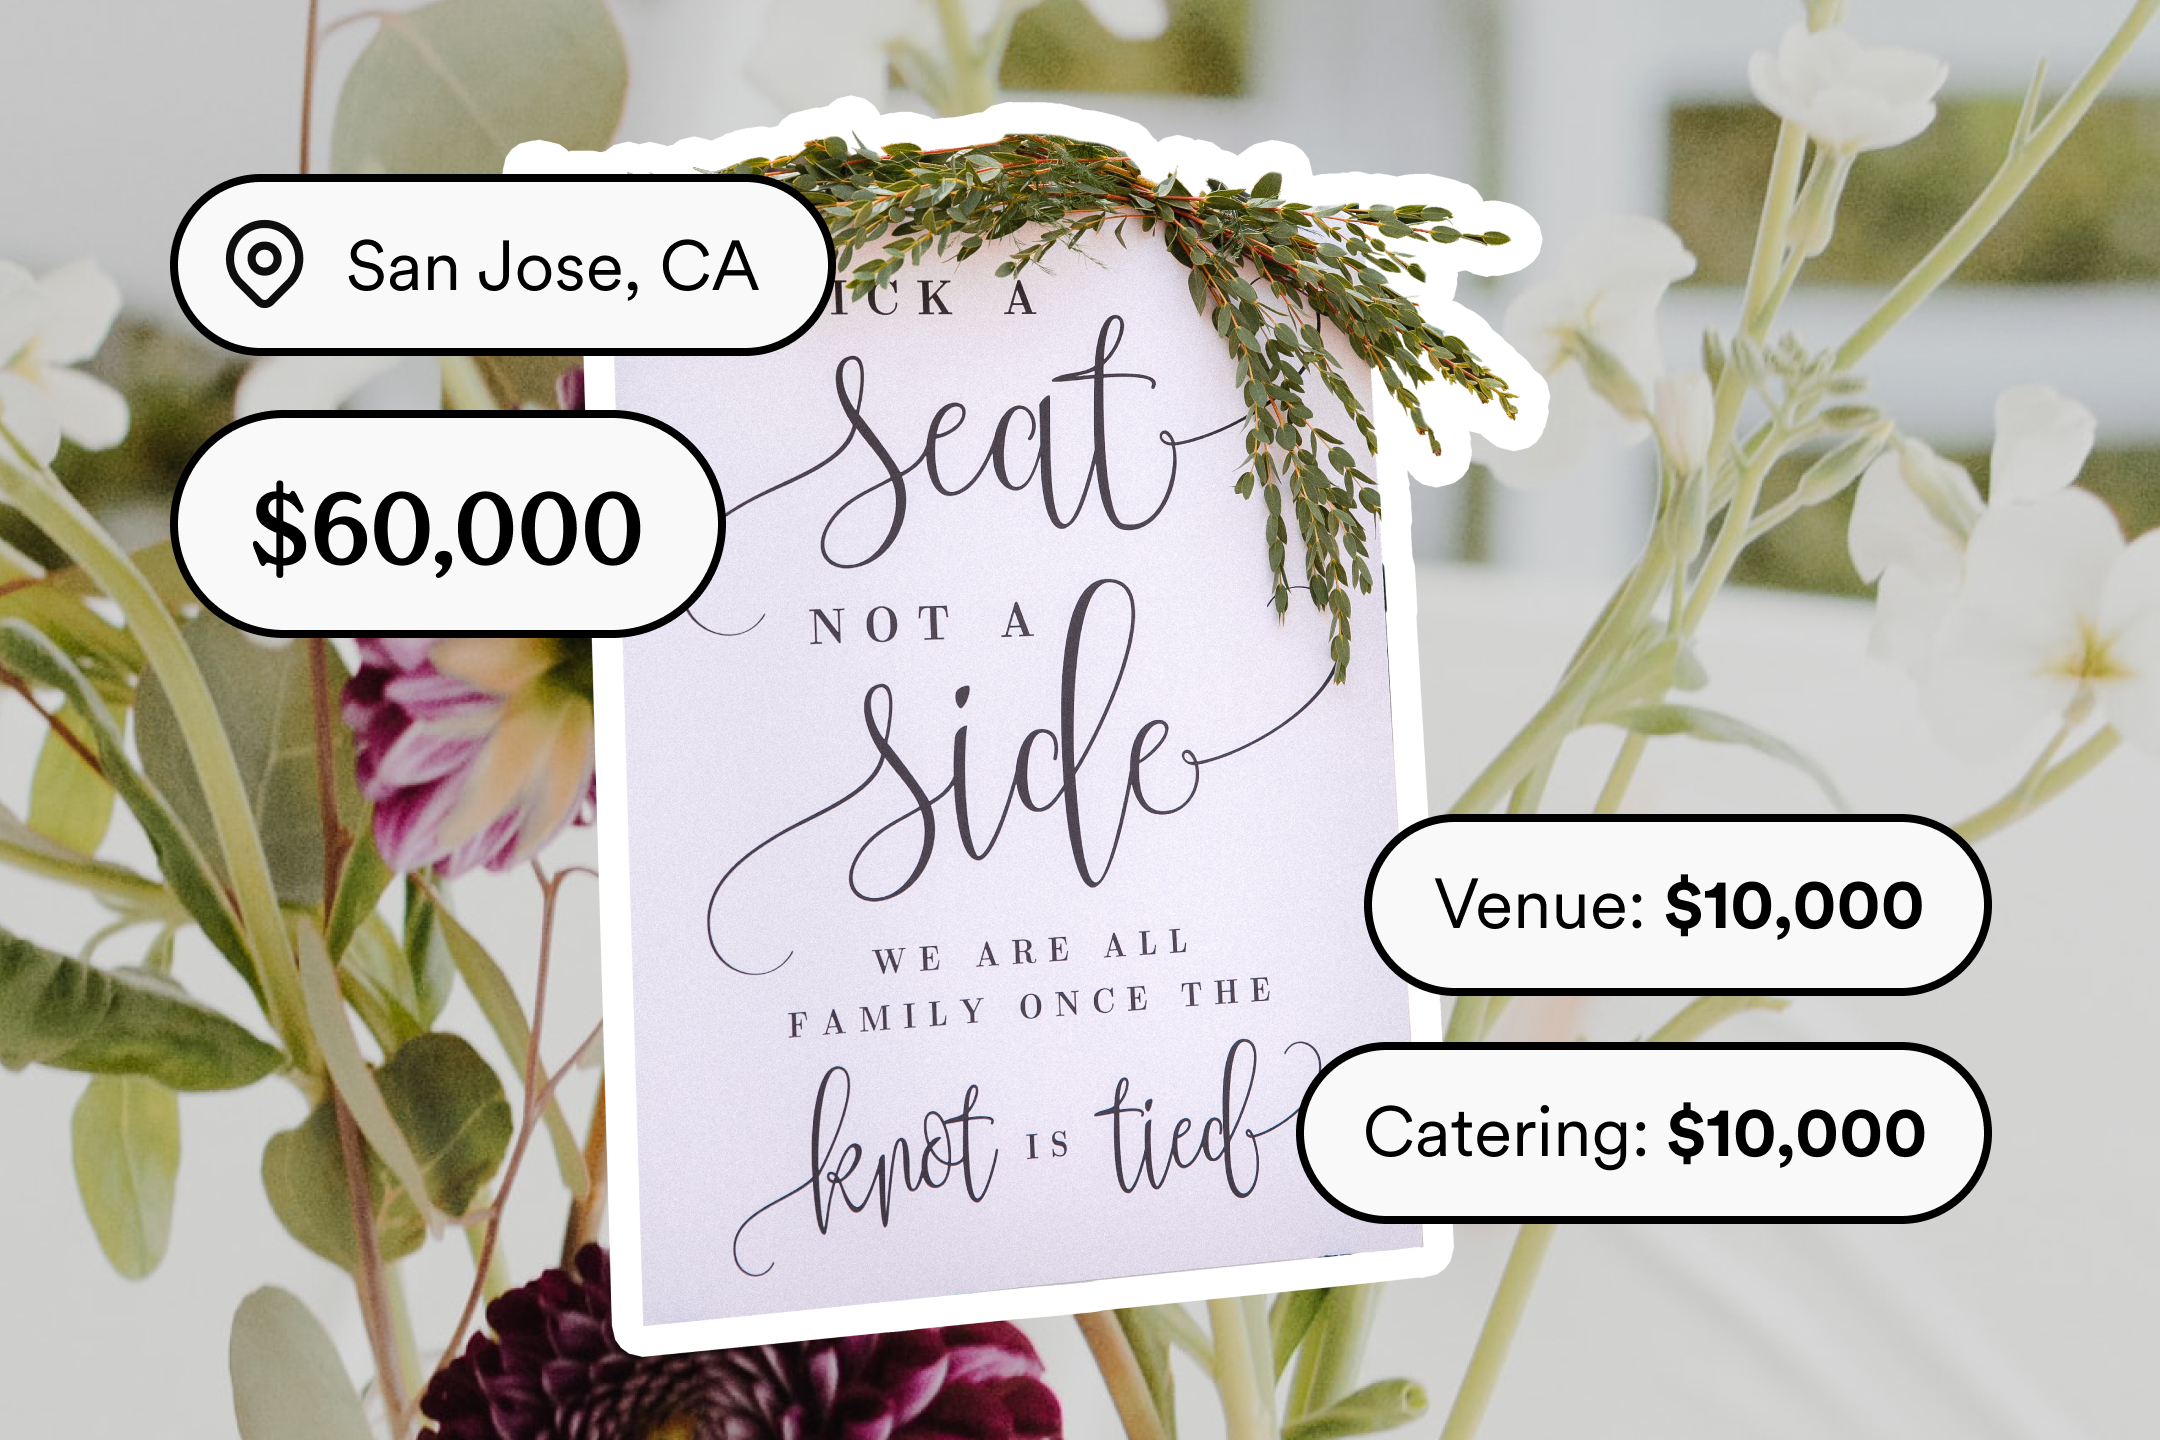 Wedding Budget 101: Budget Breakdowns, Examples, & How to Do It